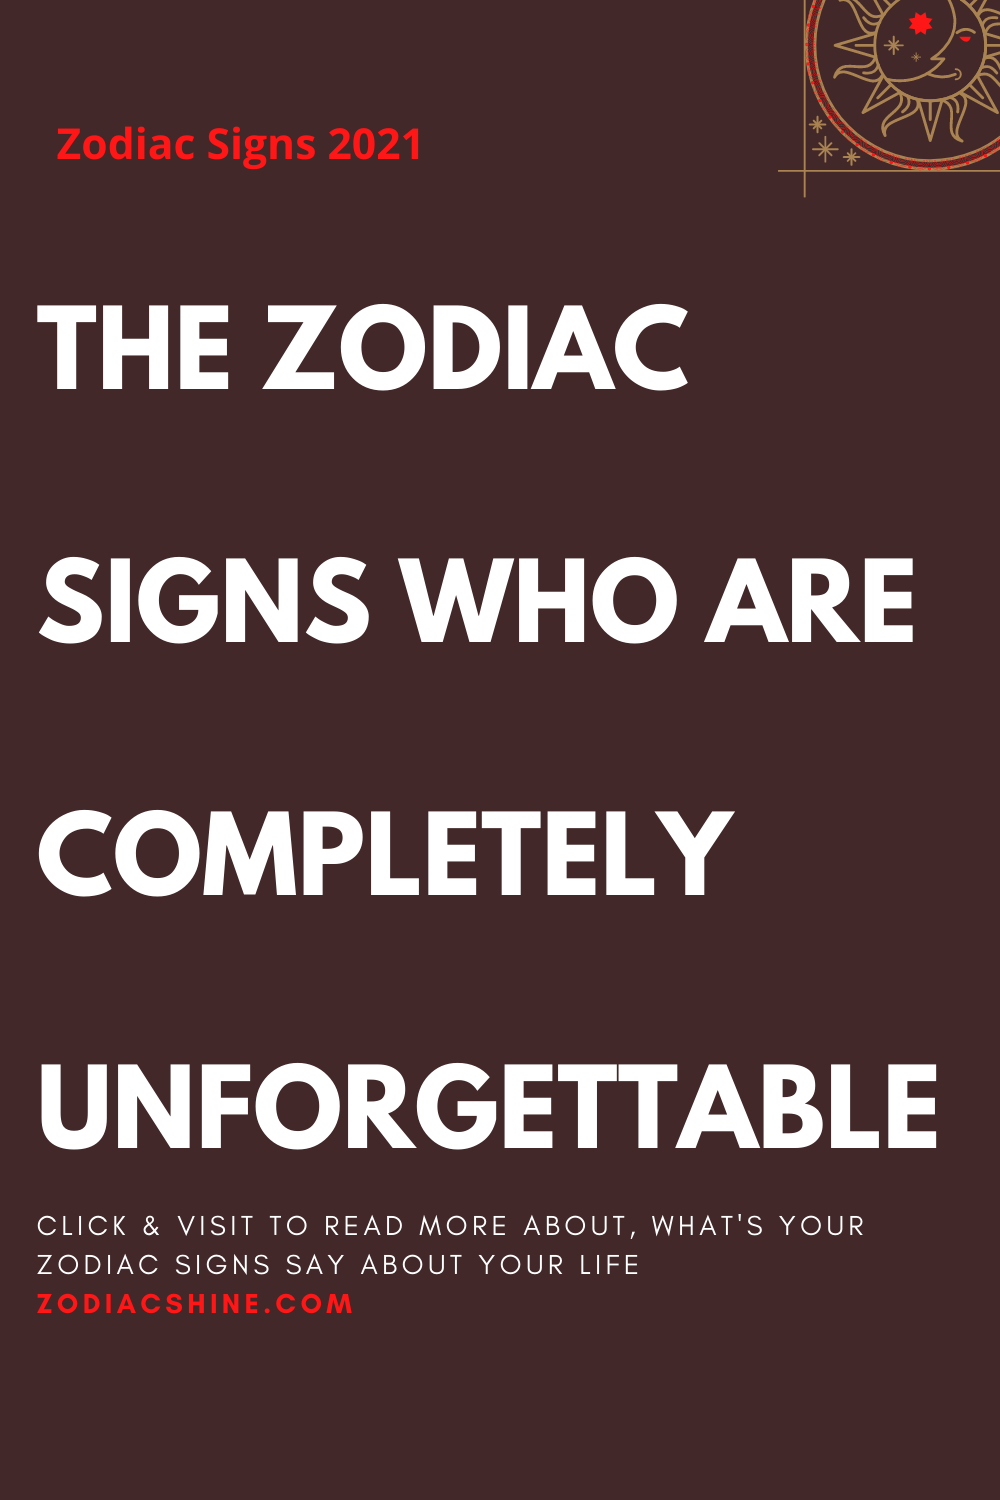 THE ZODIAC SIGNS WHO ARE COMPLETELY UNFORGETTABLE